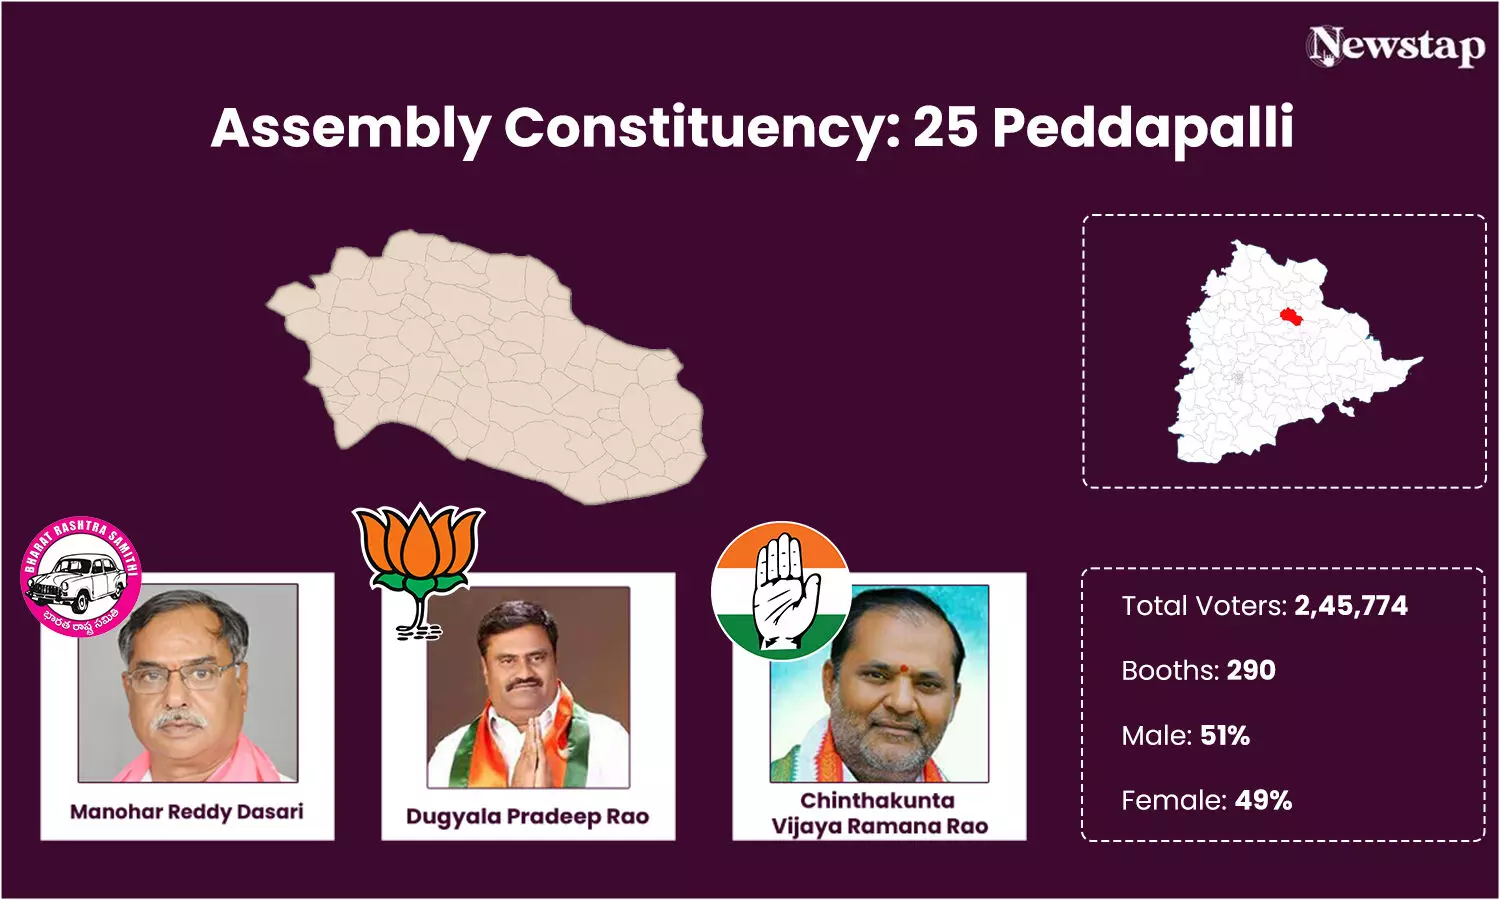 Manohar Reddy set for hattrick in Peddapalli, Congress fighting, BJP struggling for a foothold